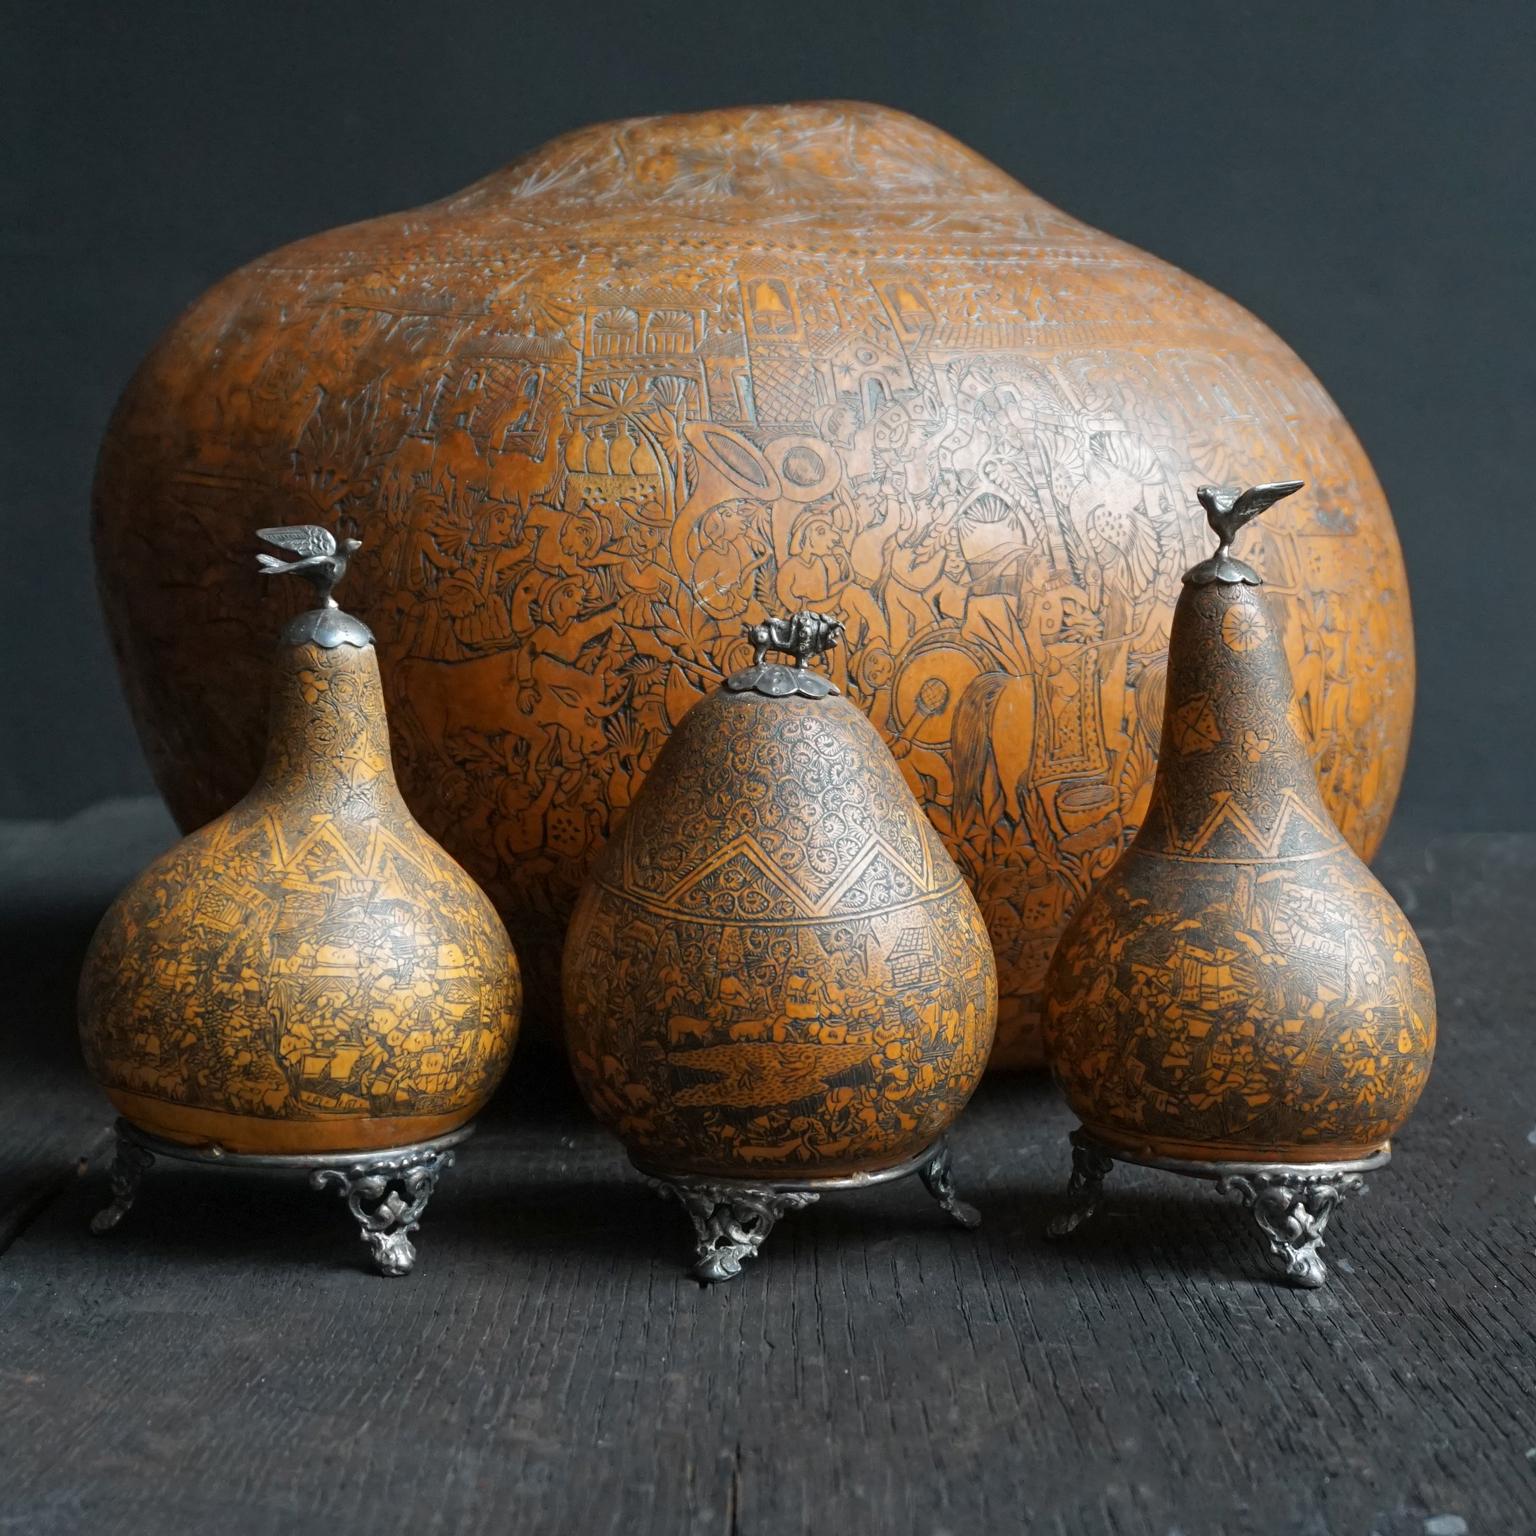 Set of four antique carved gourds from Peru, three little ones with silver settings and decorations and a large carved gourd.

A Gourd is a crop plant in the family Cucurbitaceae, like pumpkins, cucumbers, squash, luffa, and melons.
'Gourd' refers